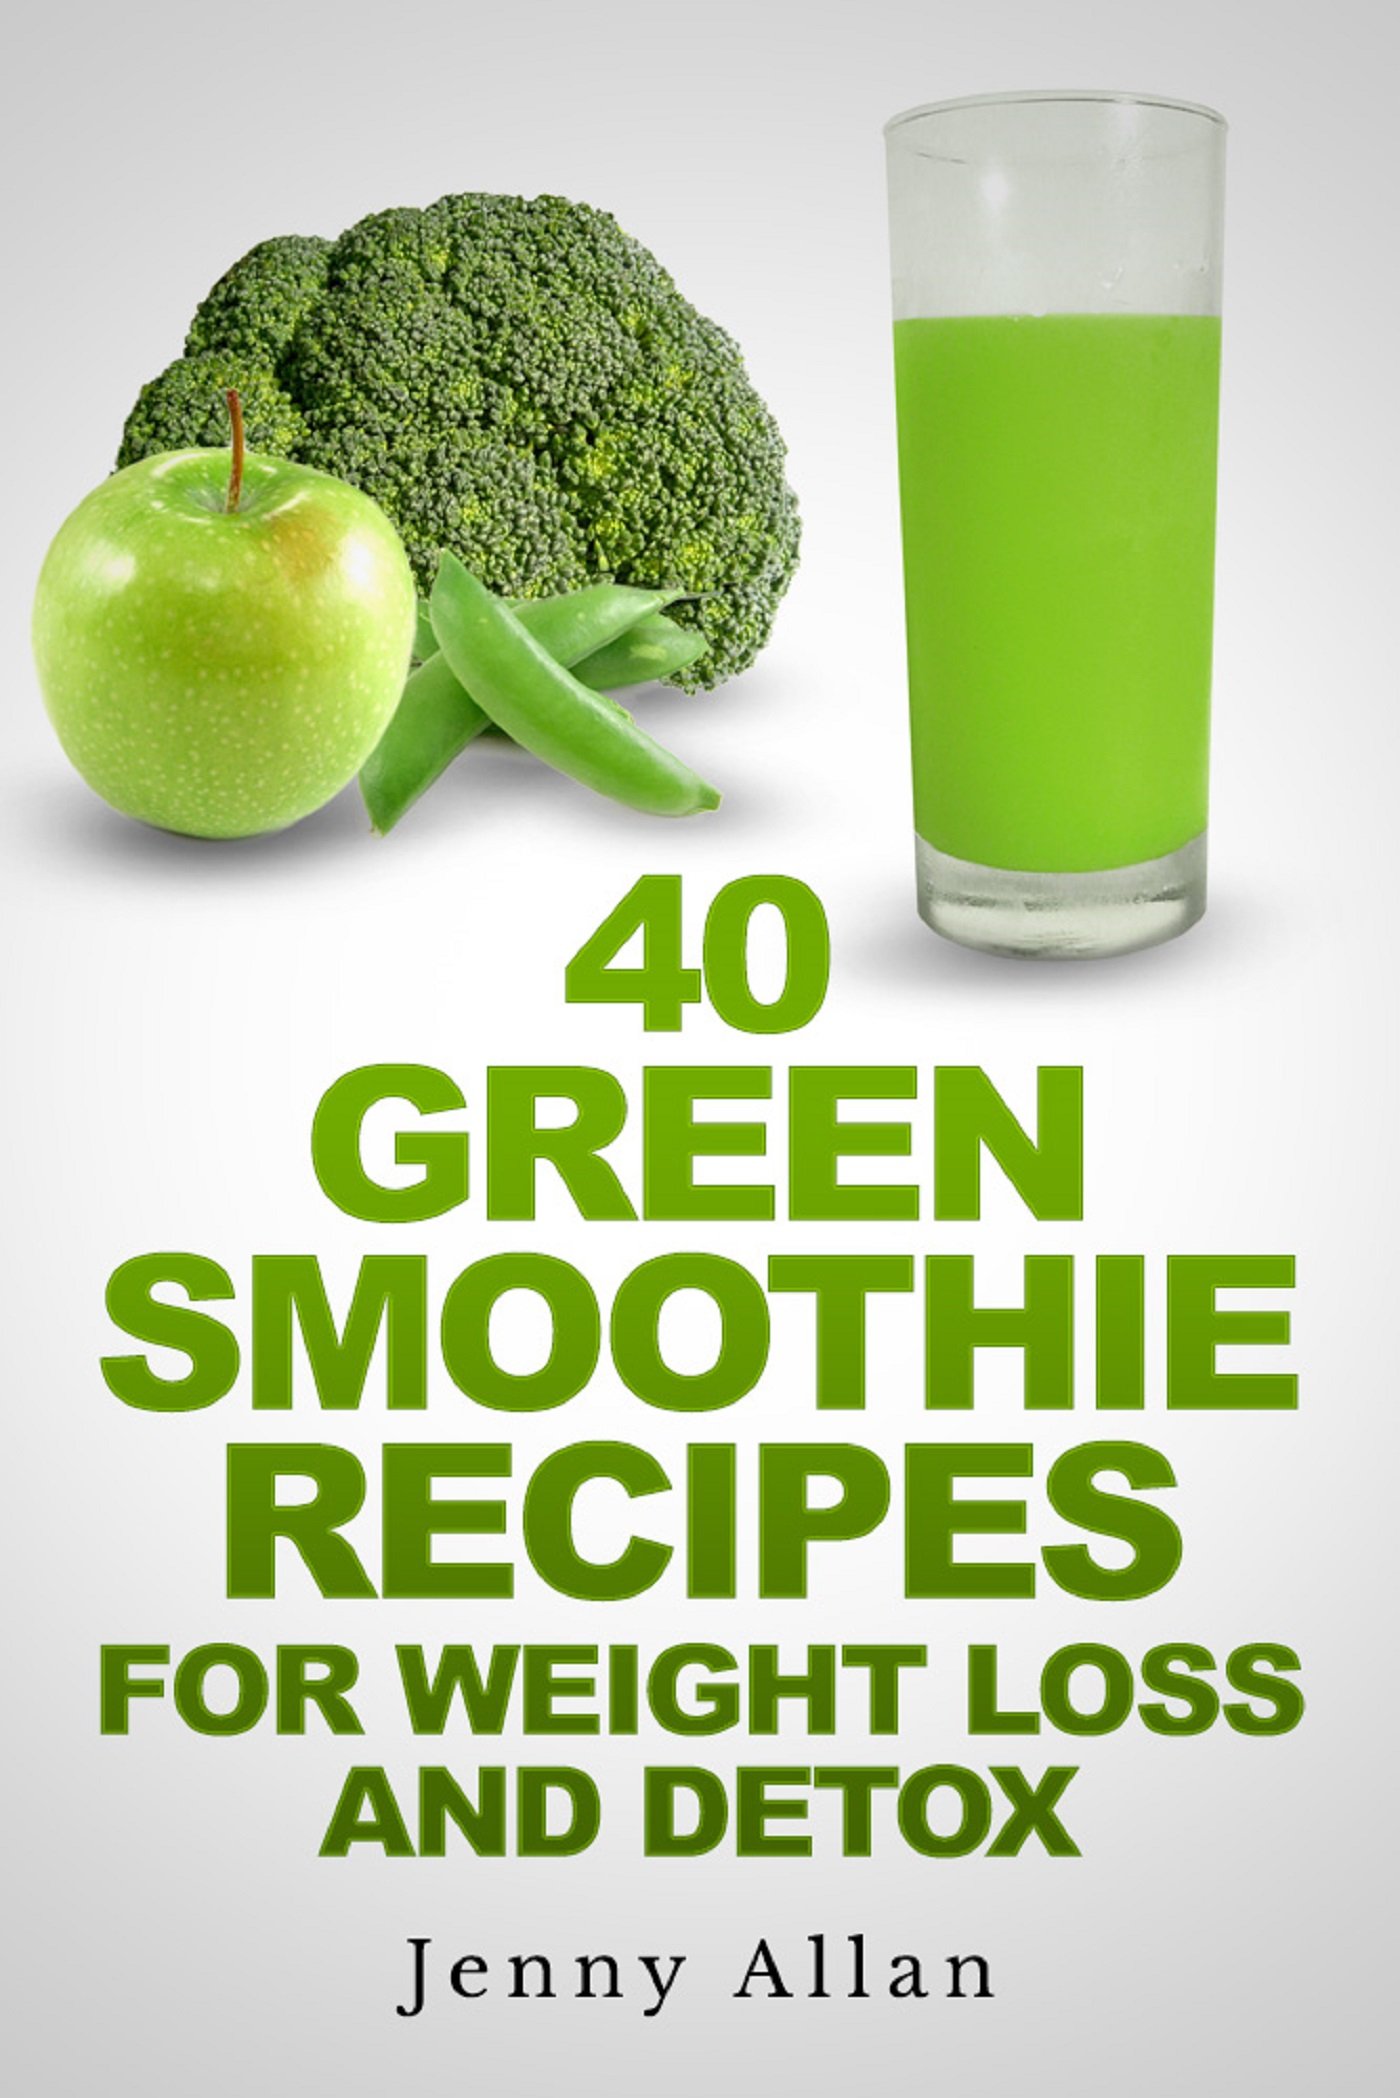 Smashwords â 40 Green Smoothie Recipes For Weight Loss and Detox Book ...